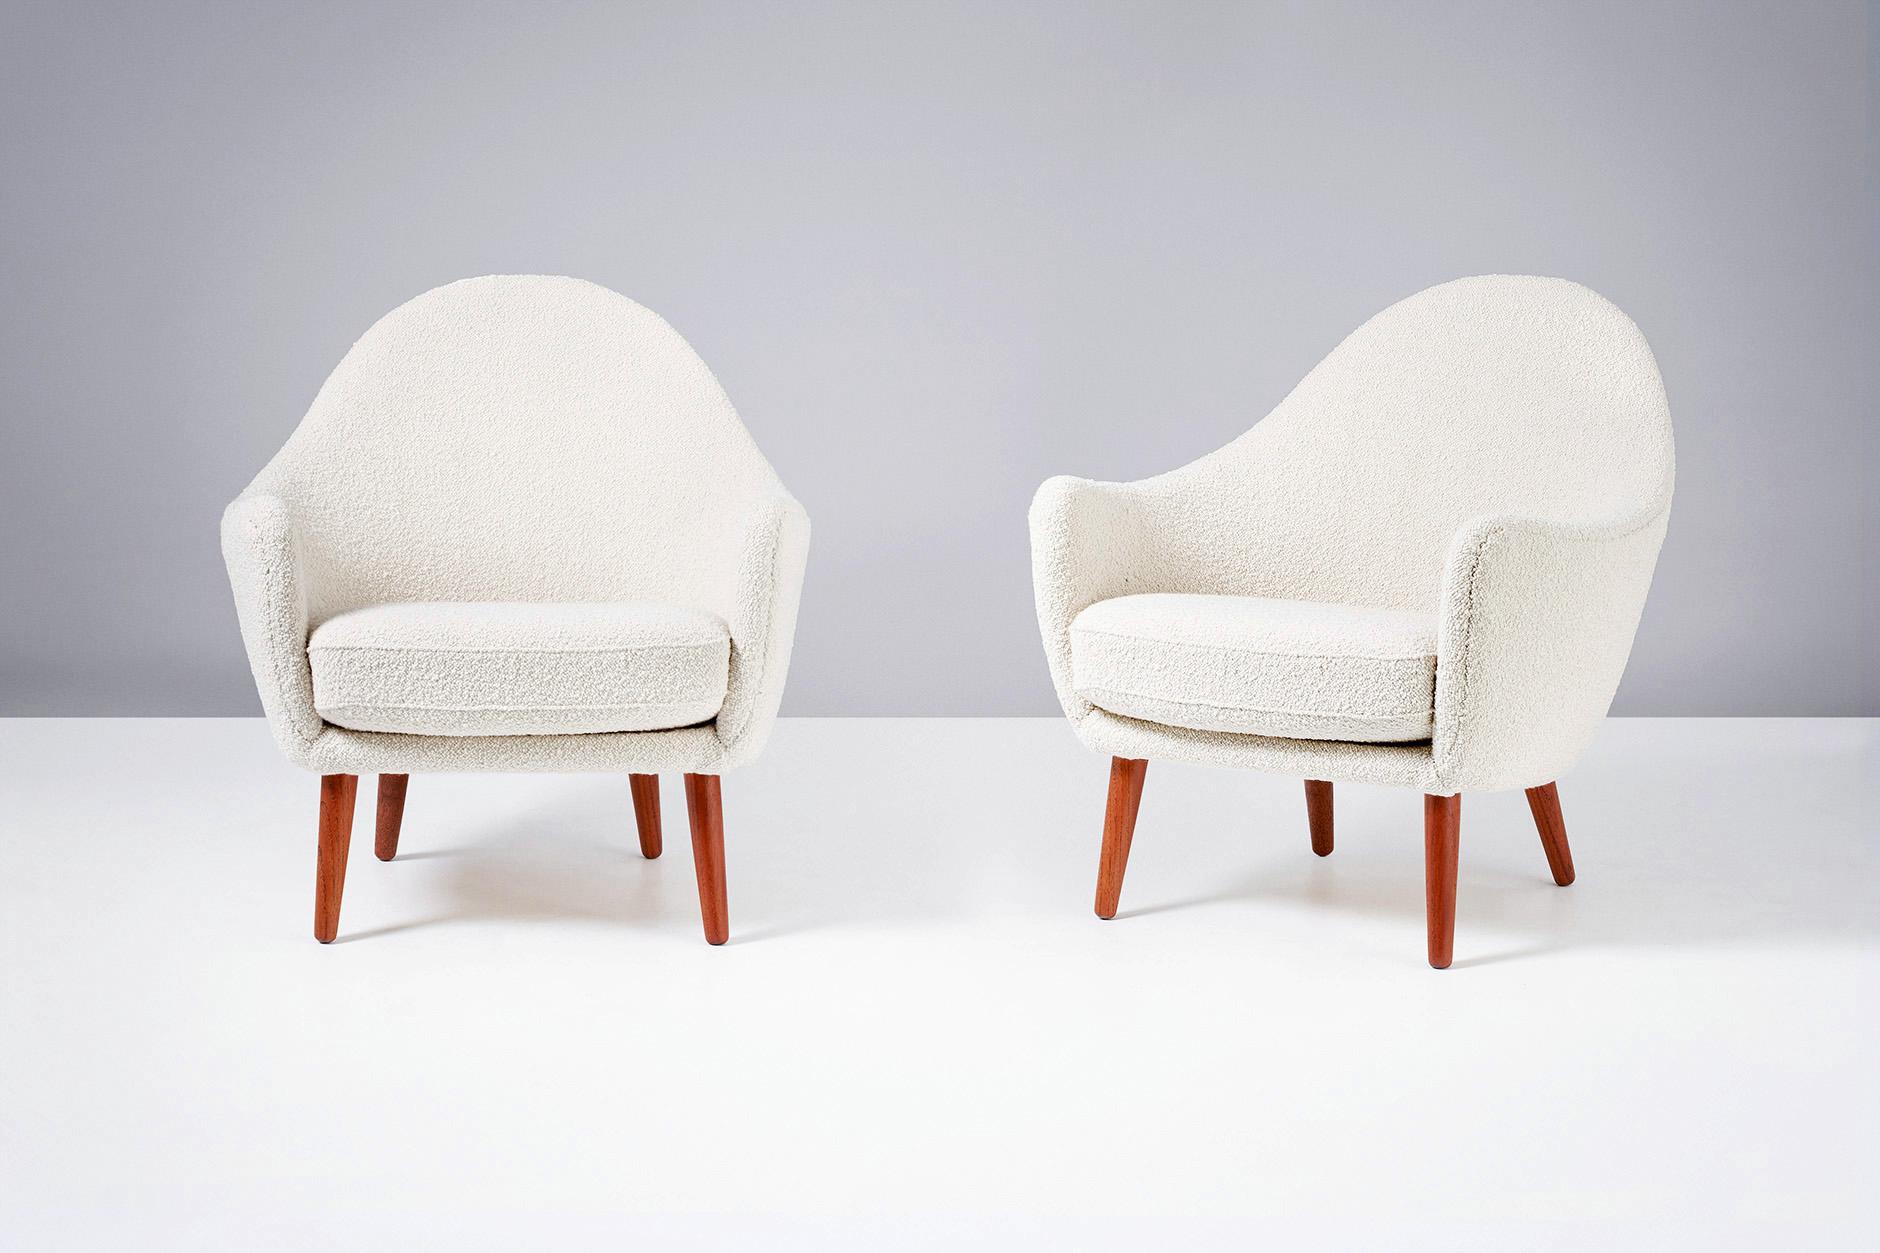 Ib Kofod-Larsen (attribute)

Lounge chairs, 1960s

Lounge chairs attributed to Ib Kofod-Larsen, circa 1960s, Denmark. Turned teak legs with seats and sprung cushions reupholstered in Dedar Boucle wool fabric.